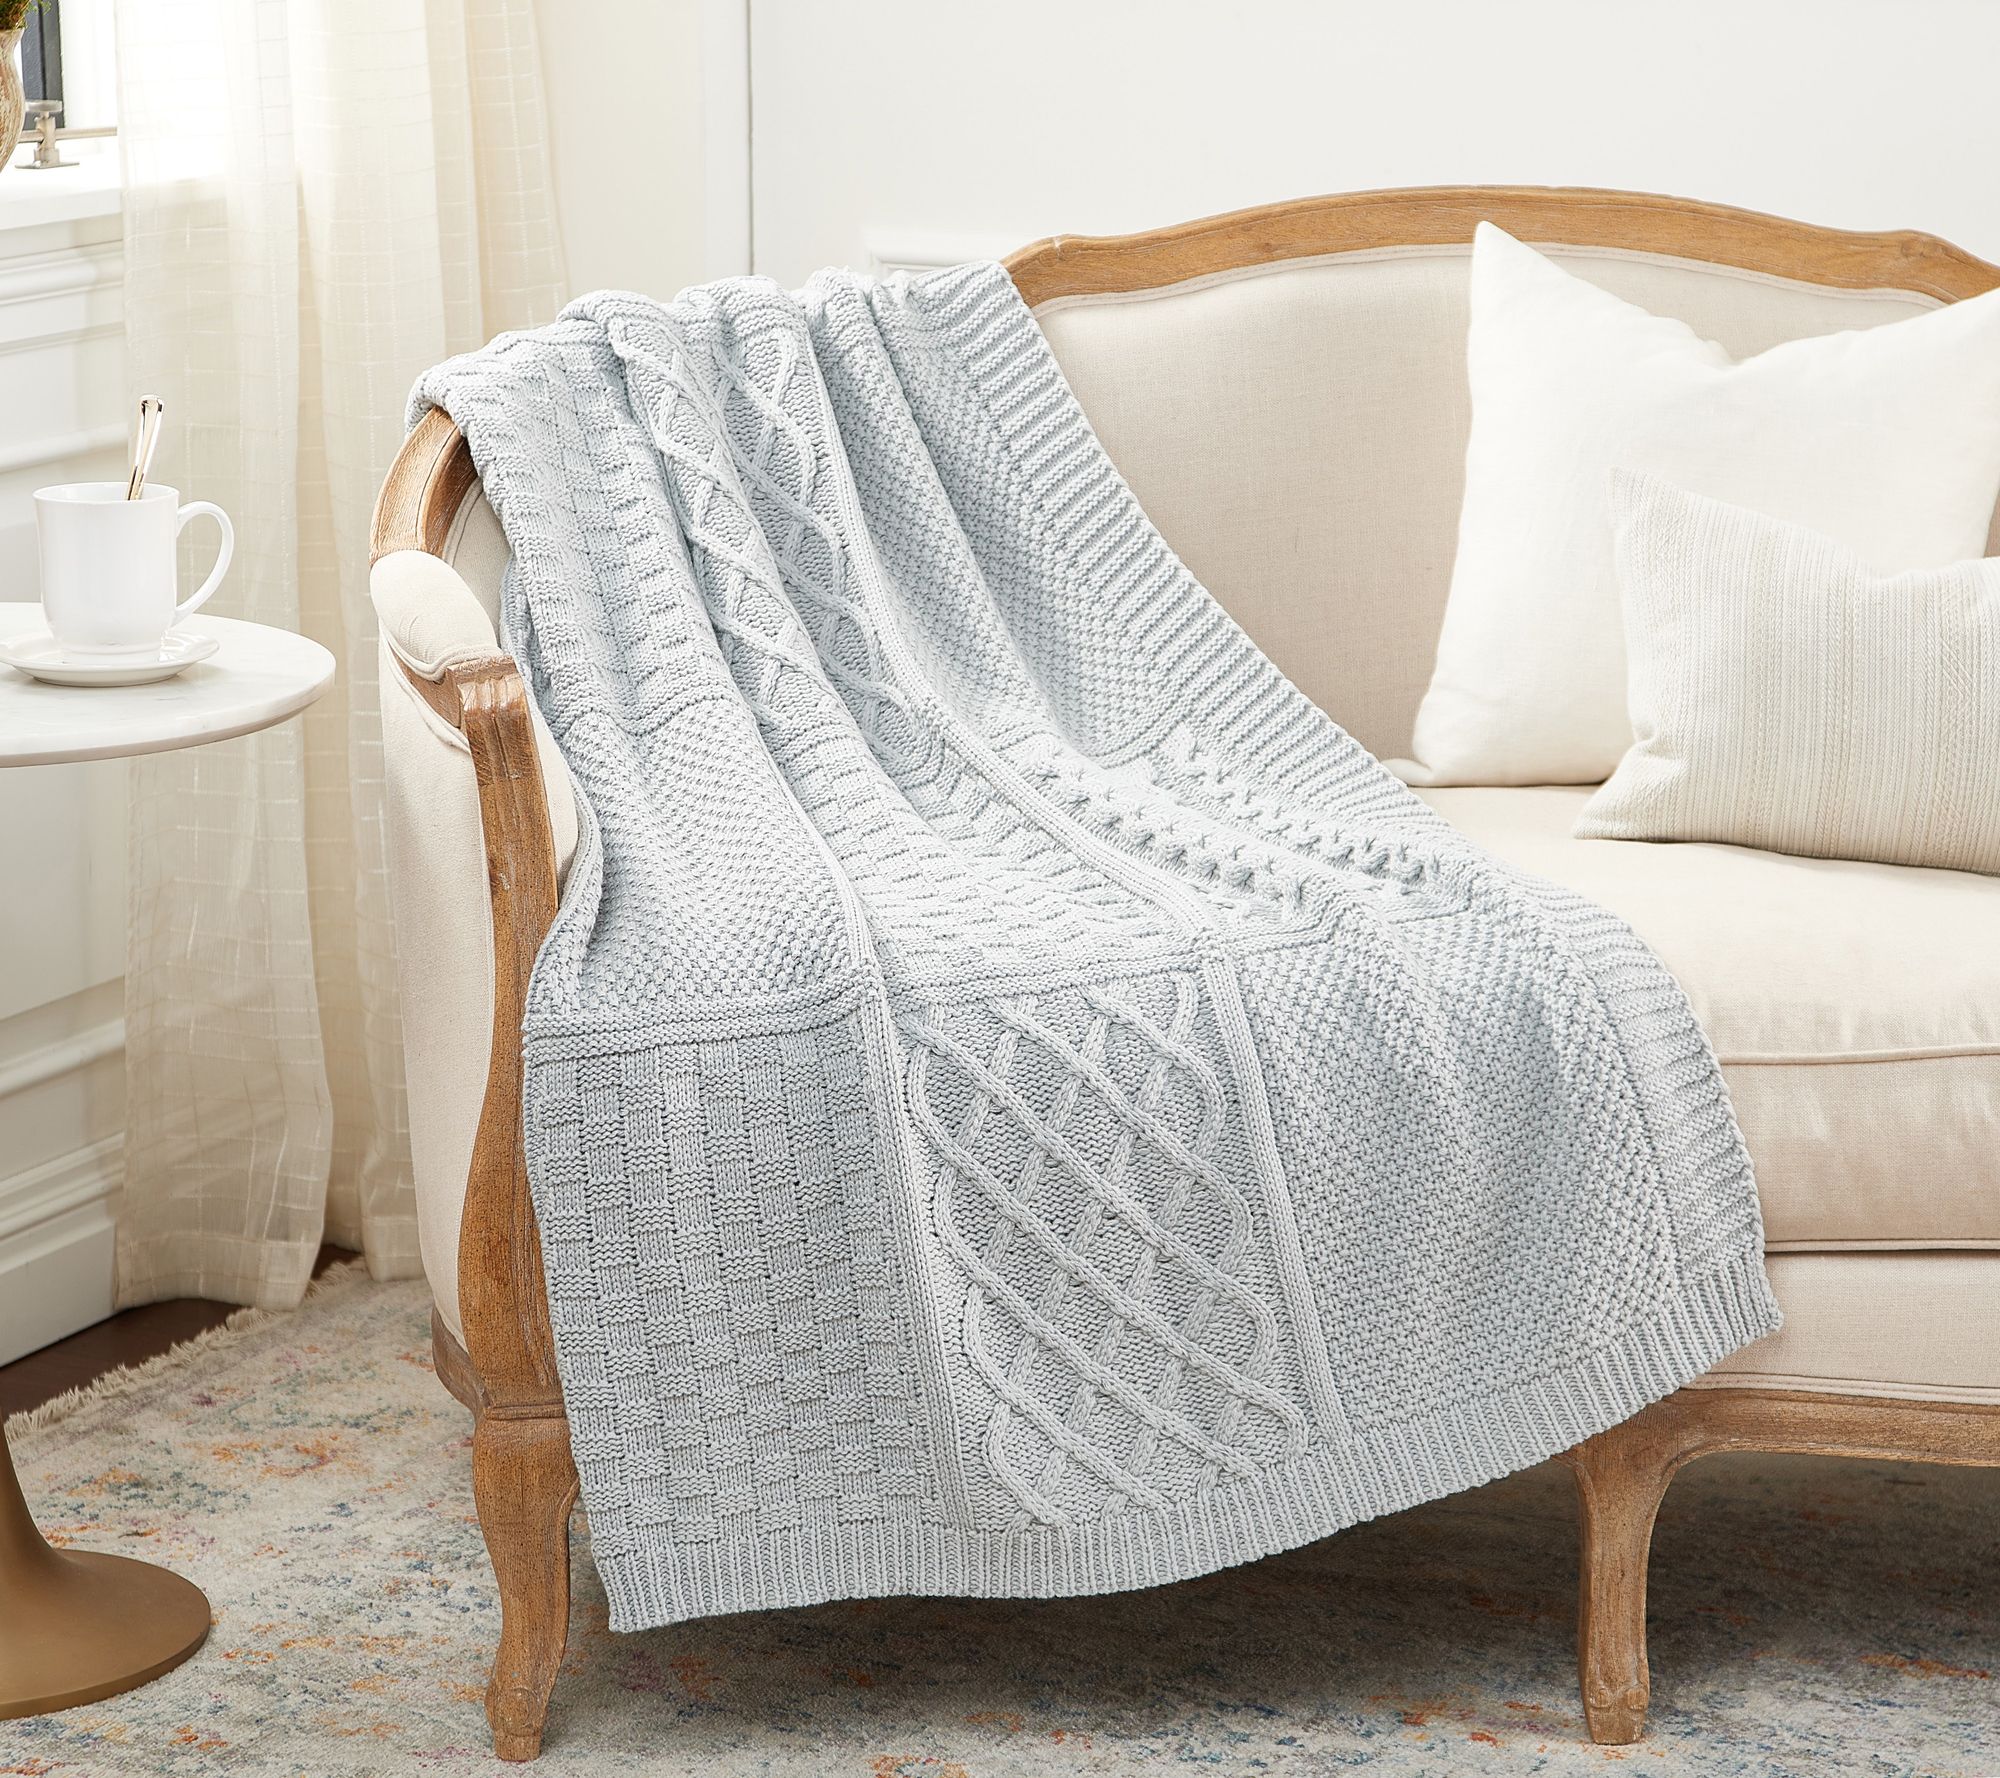 Home Reflections Oversized Knit Throw - QVC.com